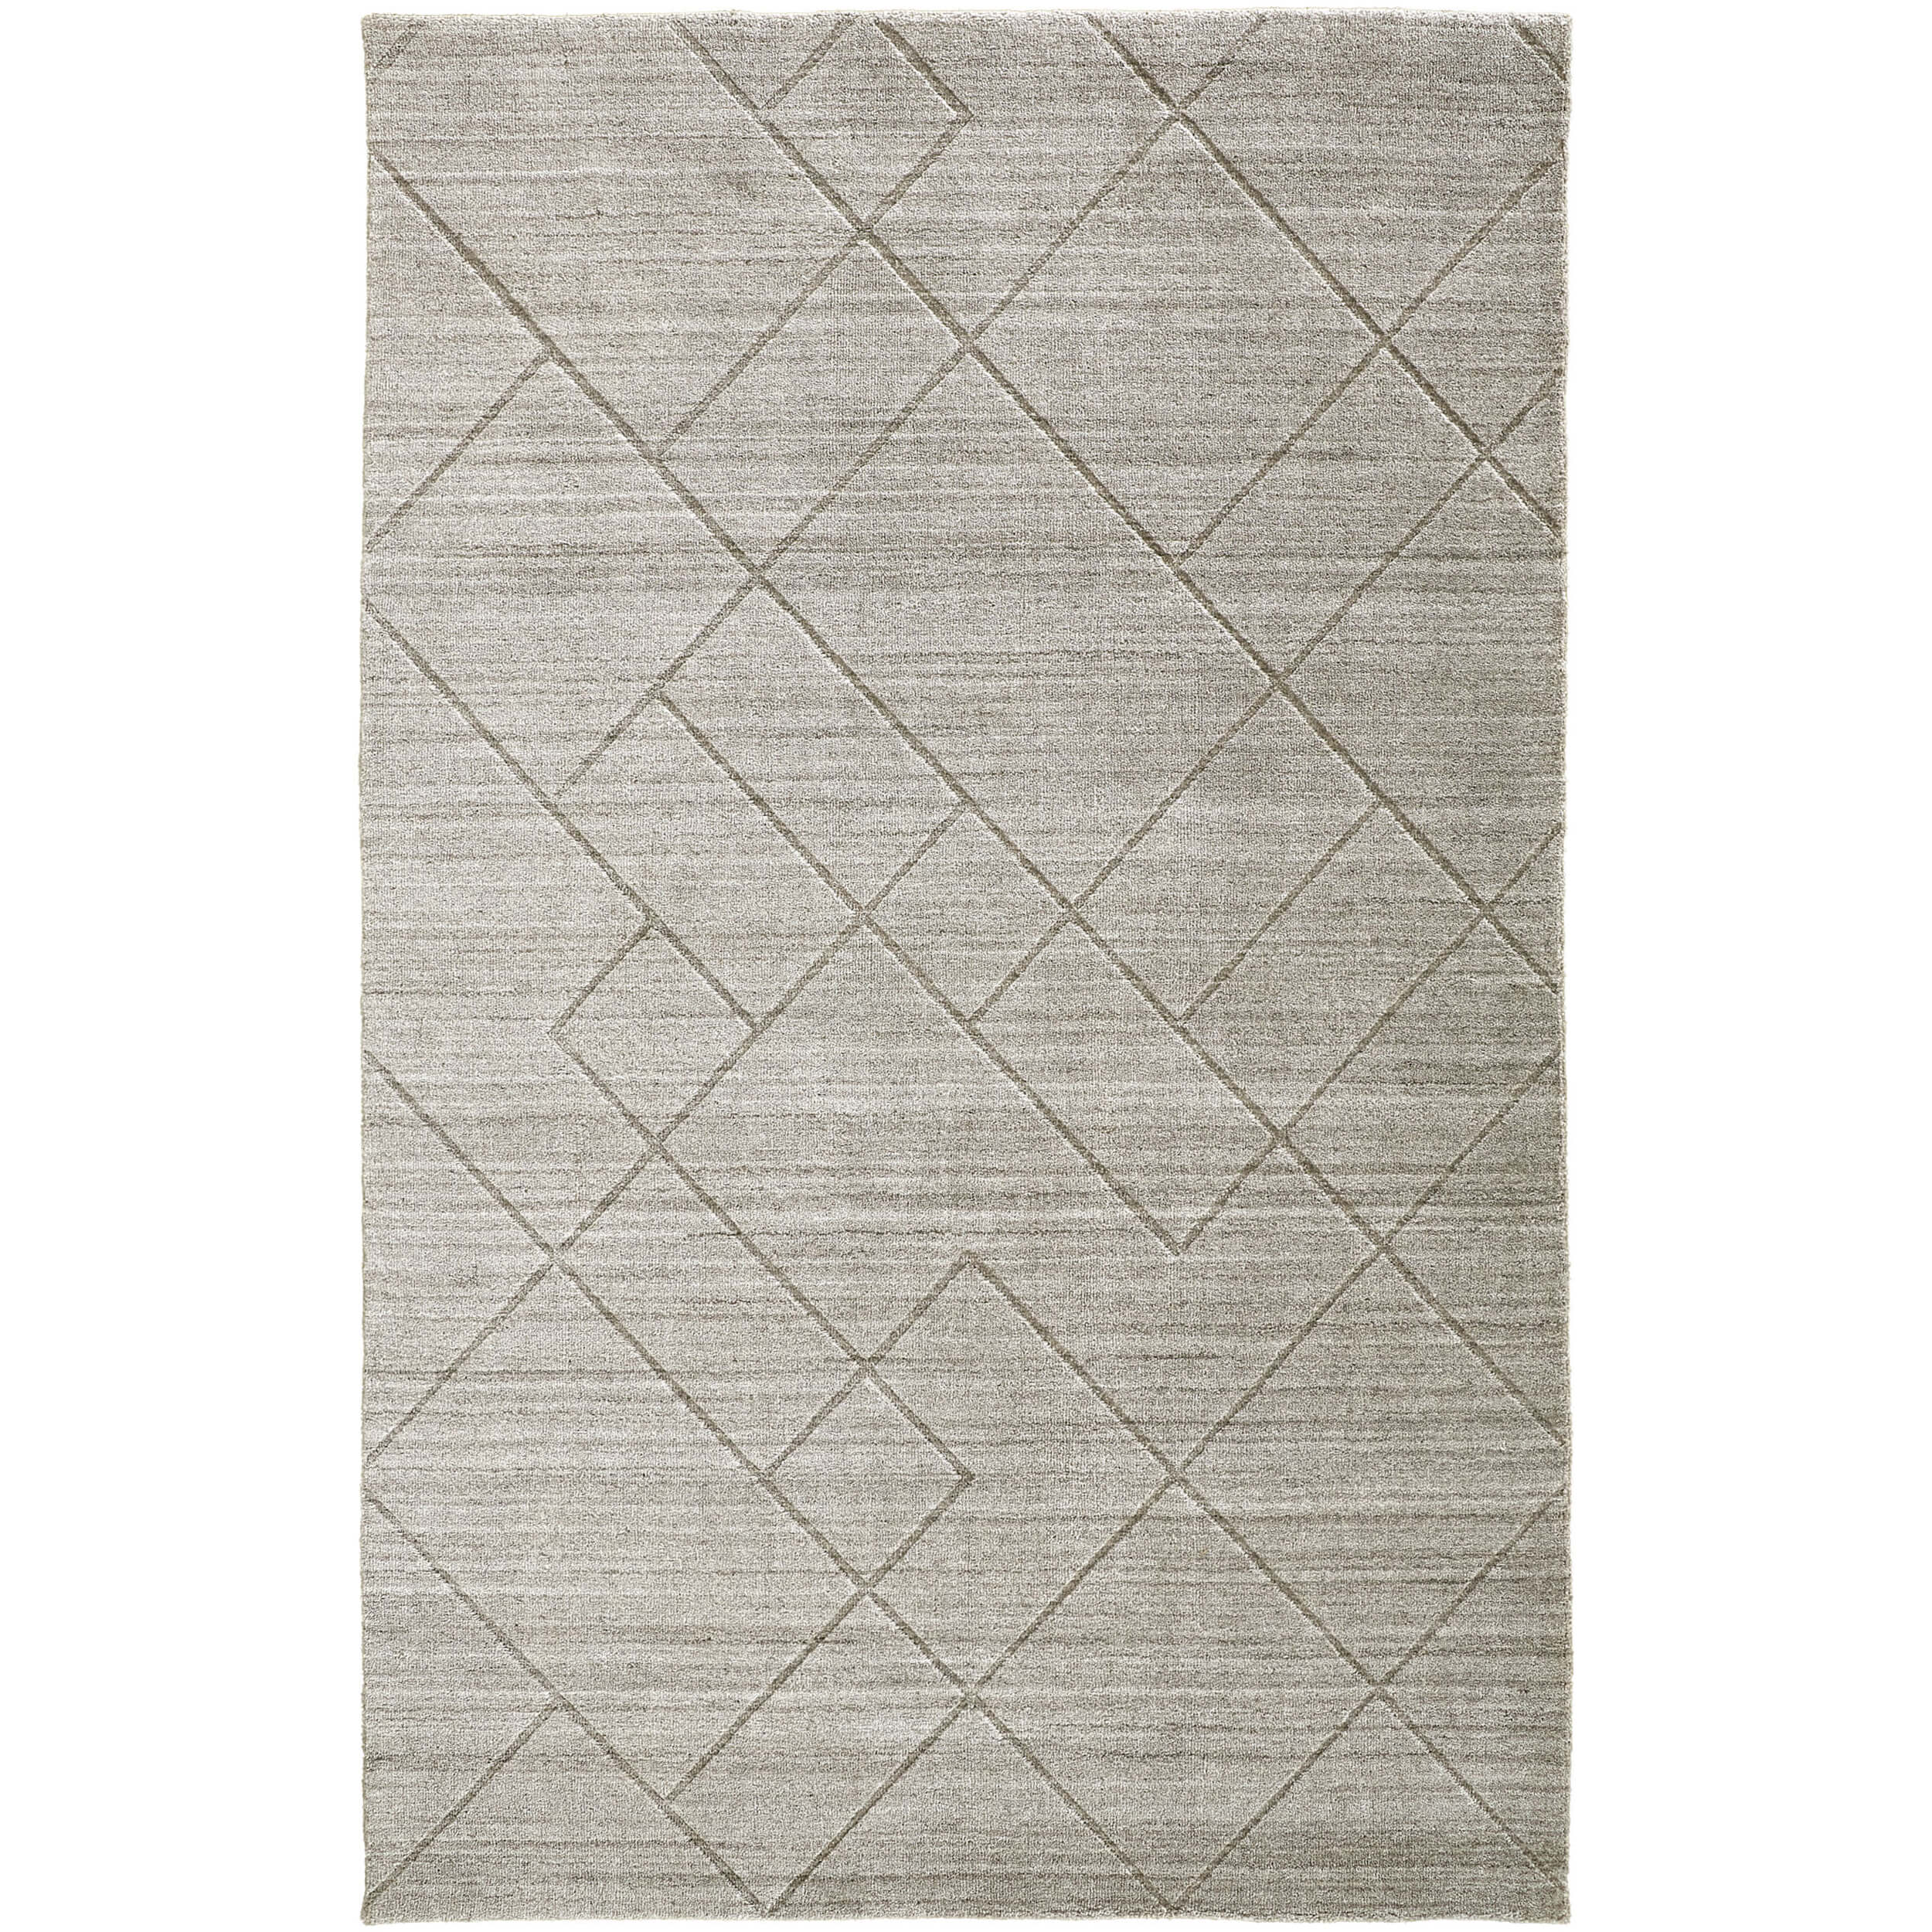 Image of Feizy Rug Redford 8848F, Beige/Gray